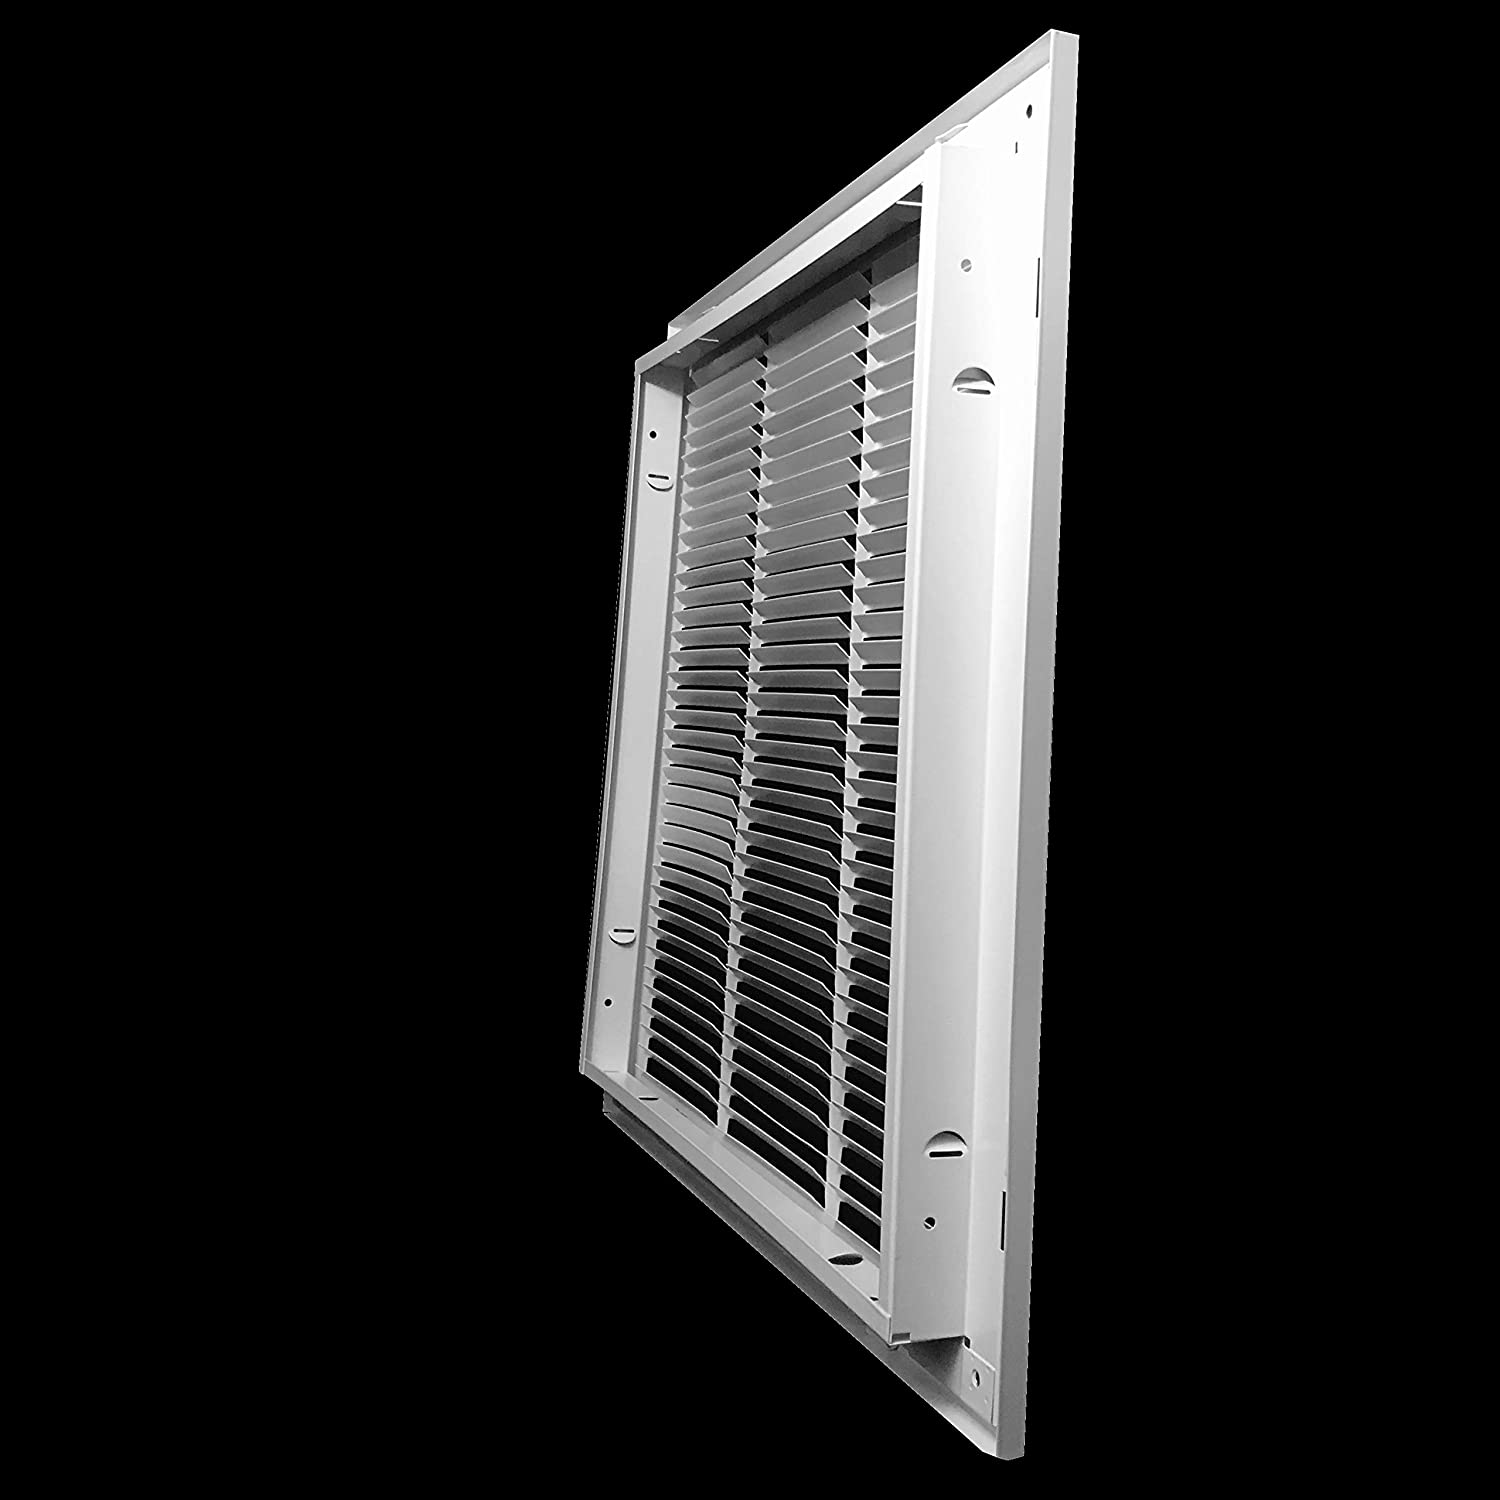 18" X 18" Duct Opening | Filter Included HD Steel Return Air Filter Grille for Sidewall and Ceiling